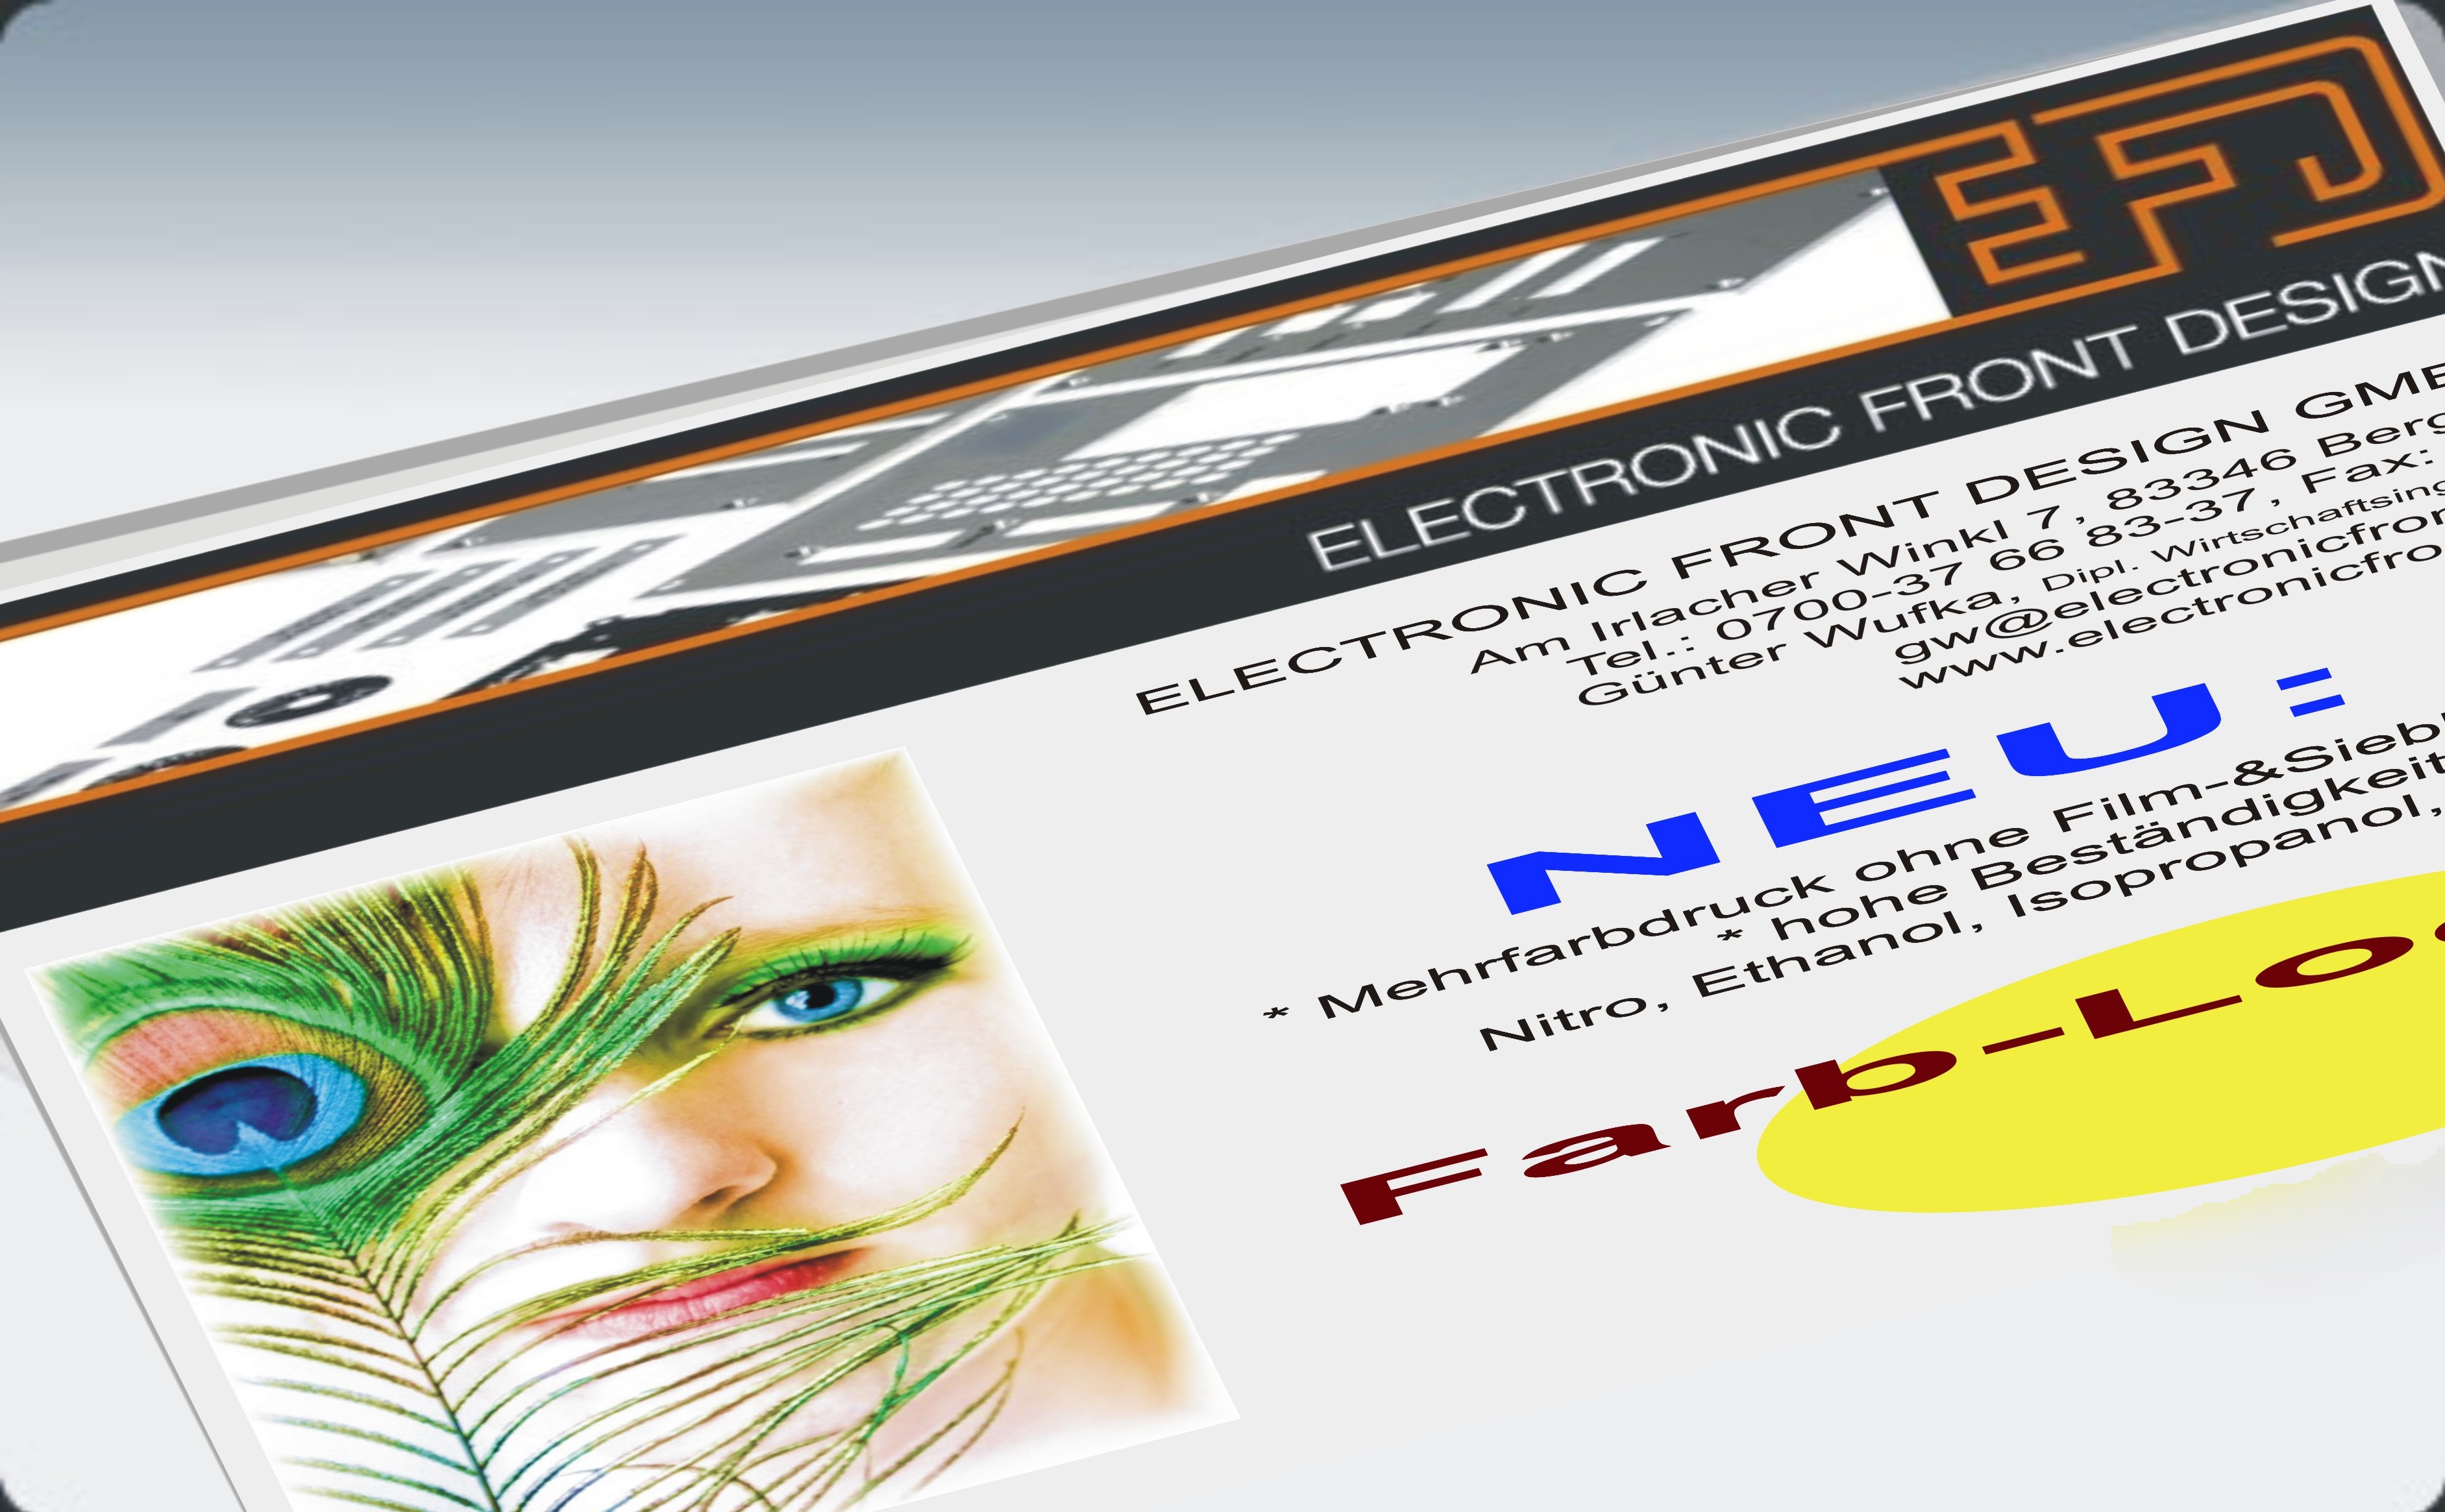 EFD - Electronic Front Design